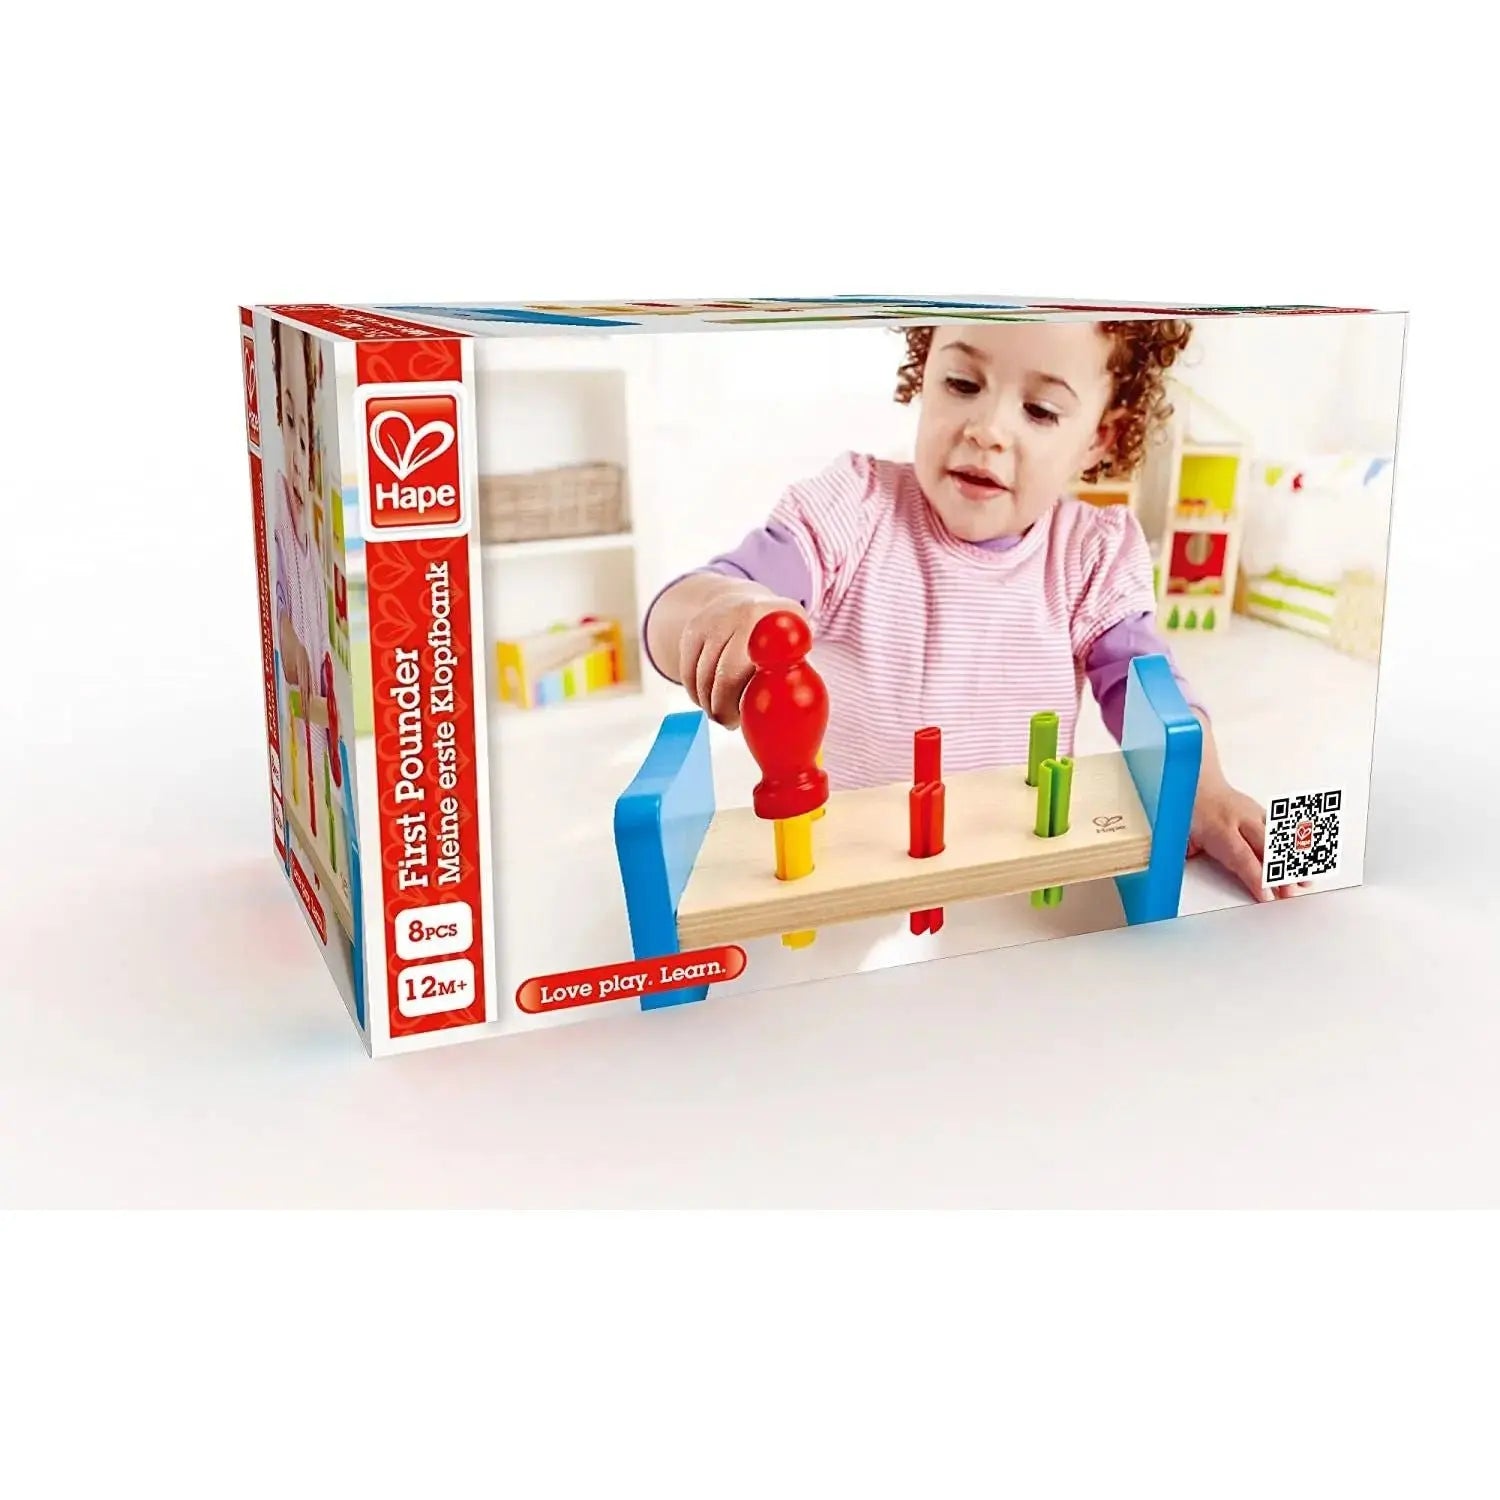 Wooden Flip Game Memory Game - Imagine That Toys